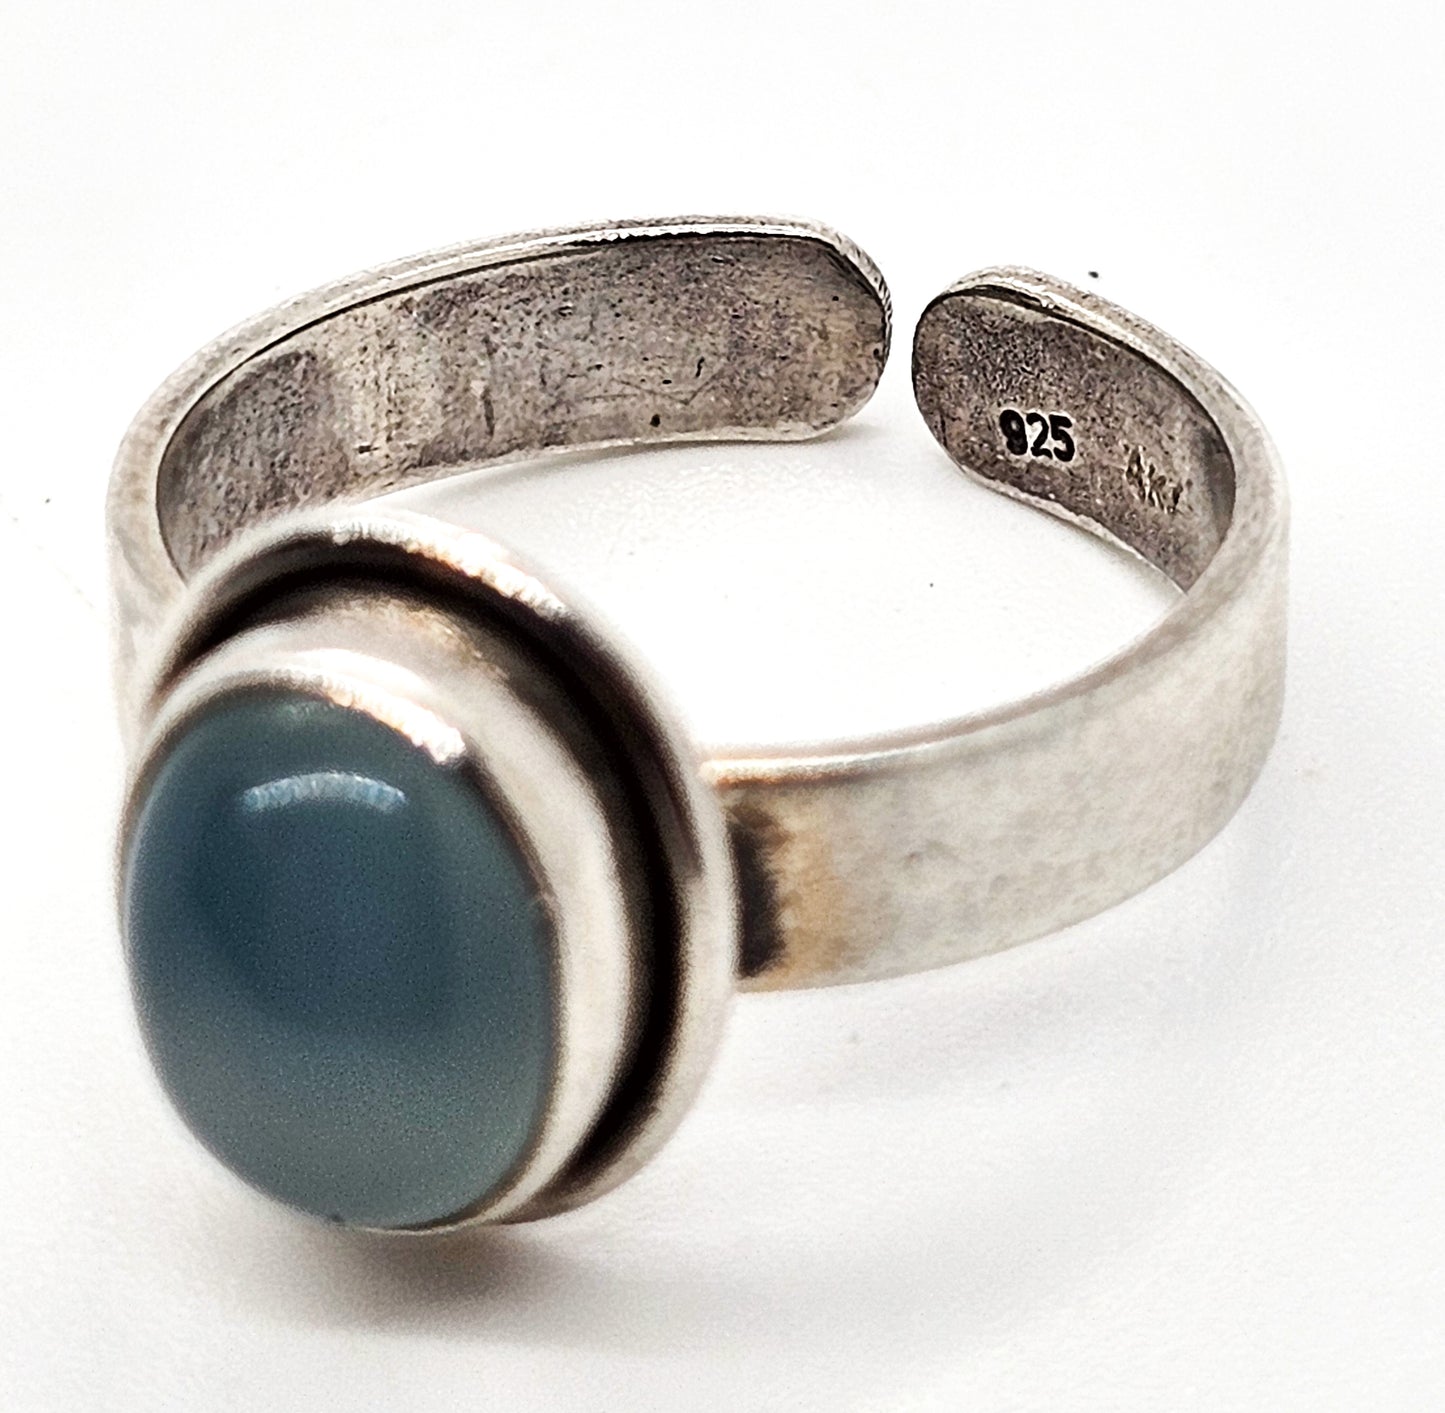 Blue chalcedony  vintage sterling silver adjustable thick band ring size 9